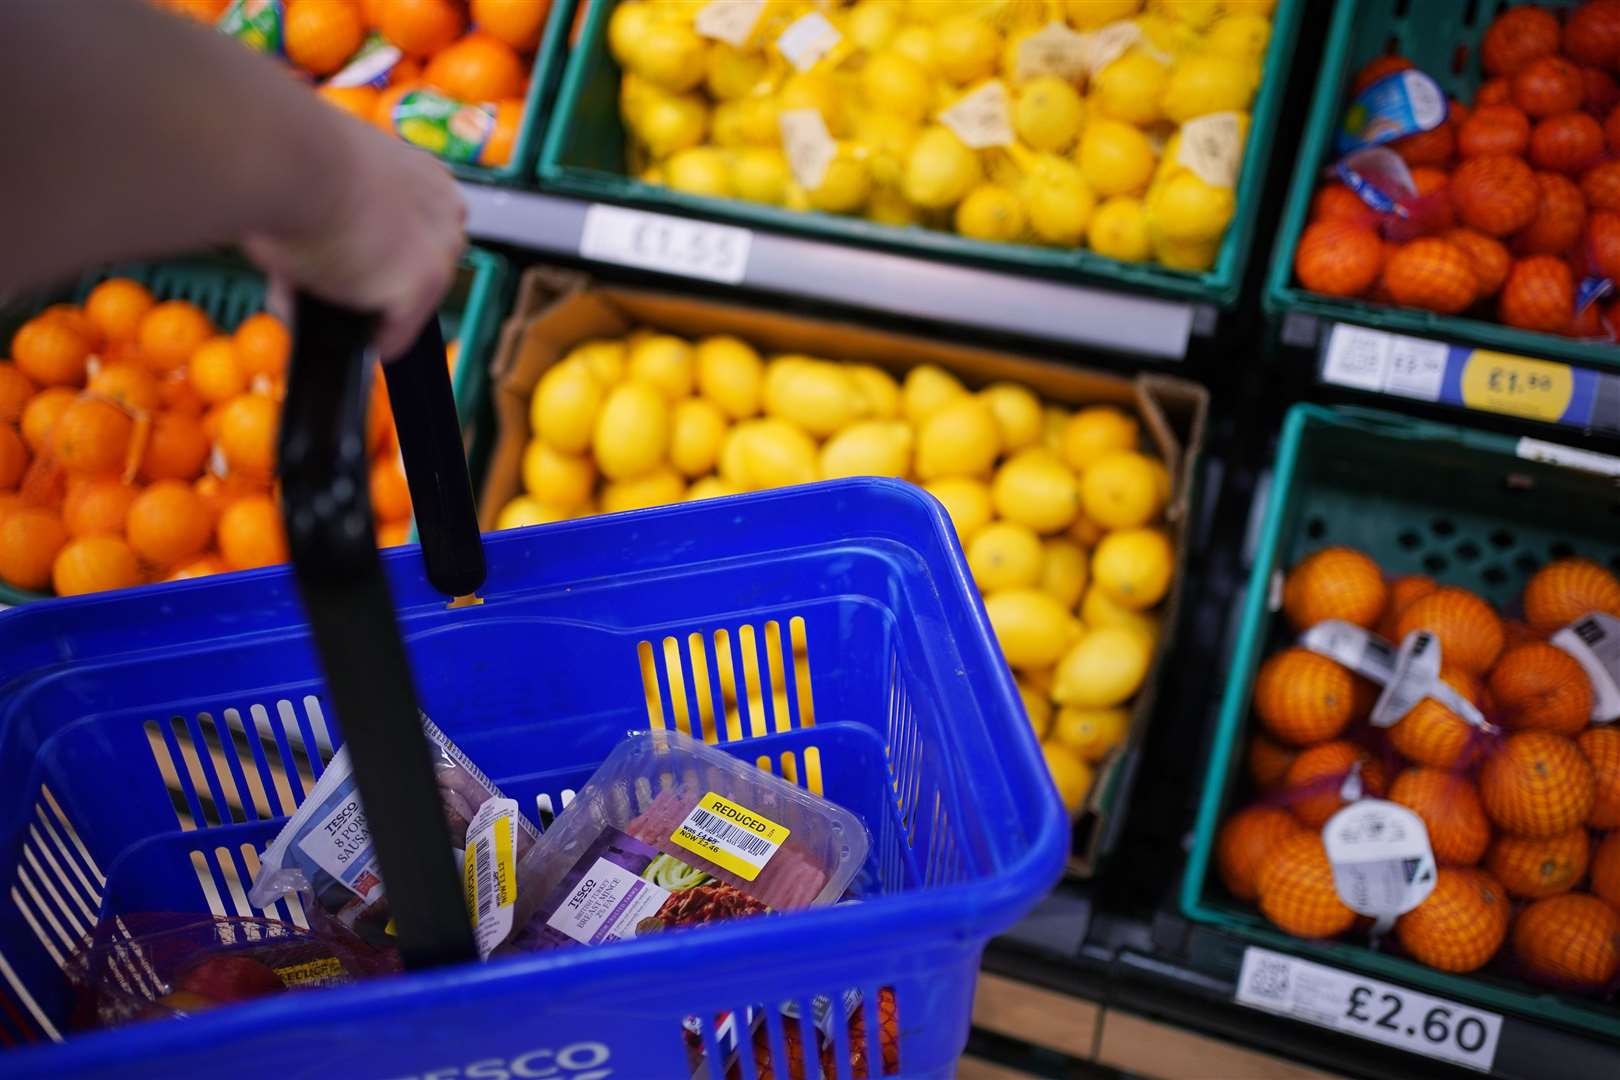 The move will help consumers to support British farmers and producers, Tesco said (Yui Mok/PA)